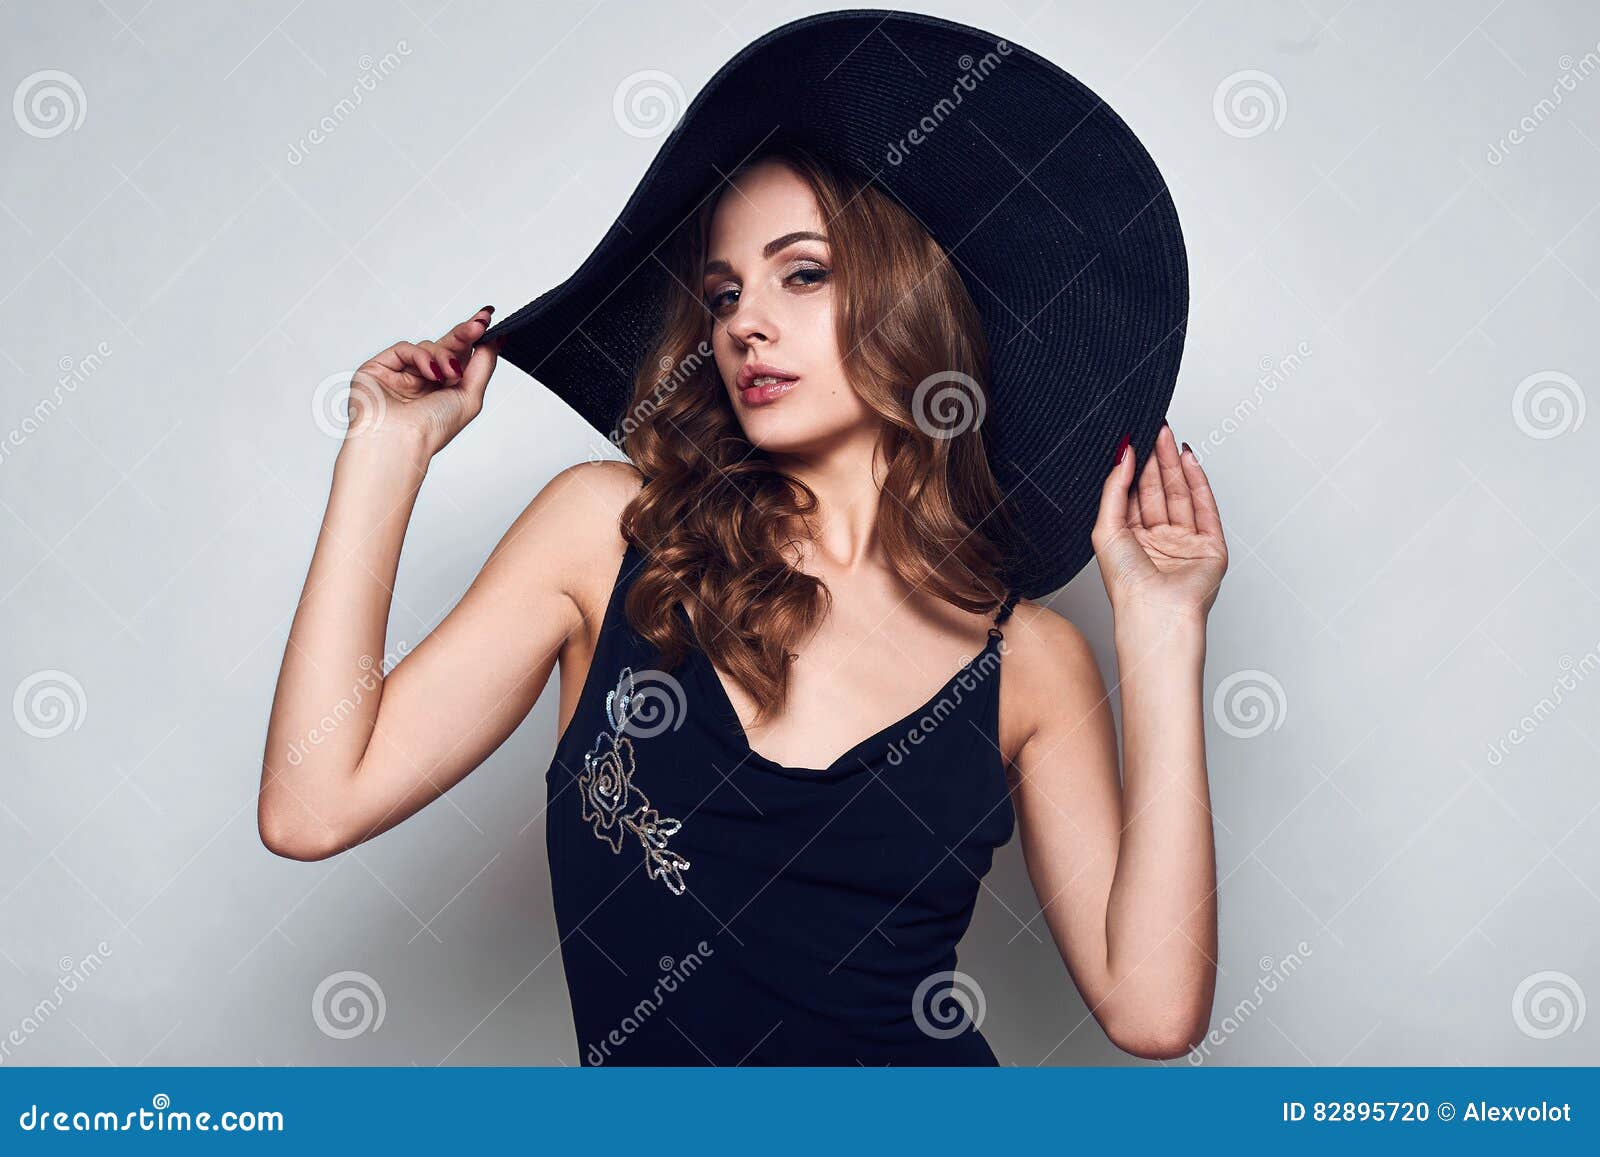 Elegant Beautiful Woman in a Black Dress and Hat Stock Photo - Image of ...